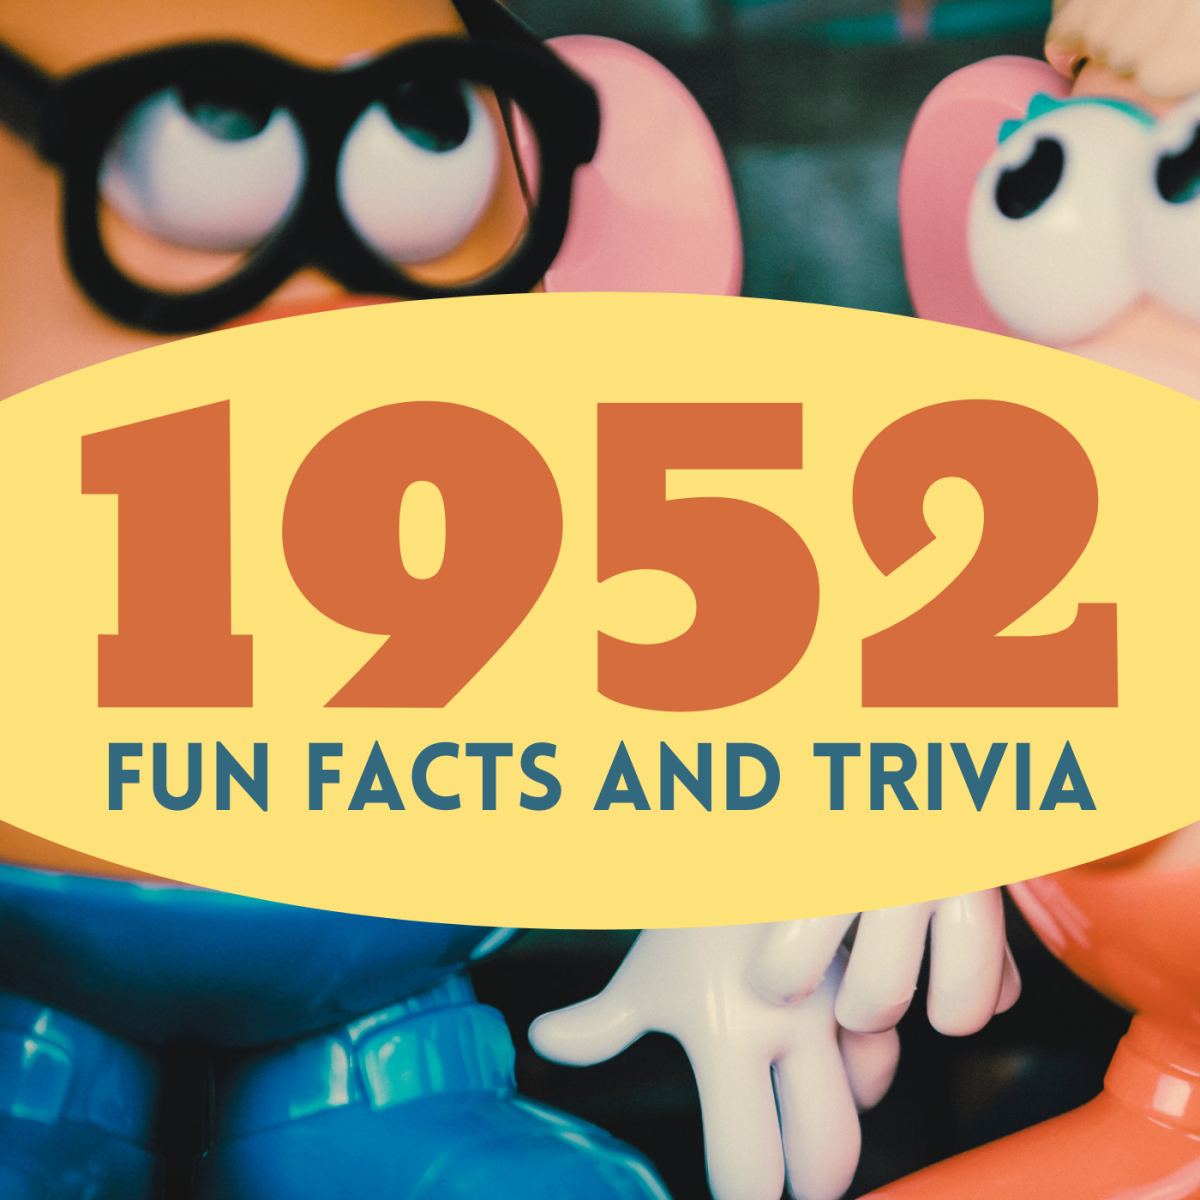 Mr. Potato Head was introduced in 1952. What else do you know about this year? This article teaches you fun facts, trivia, and history events from the year 1952.